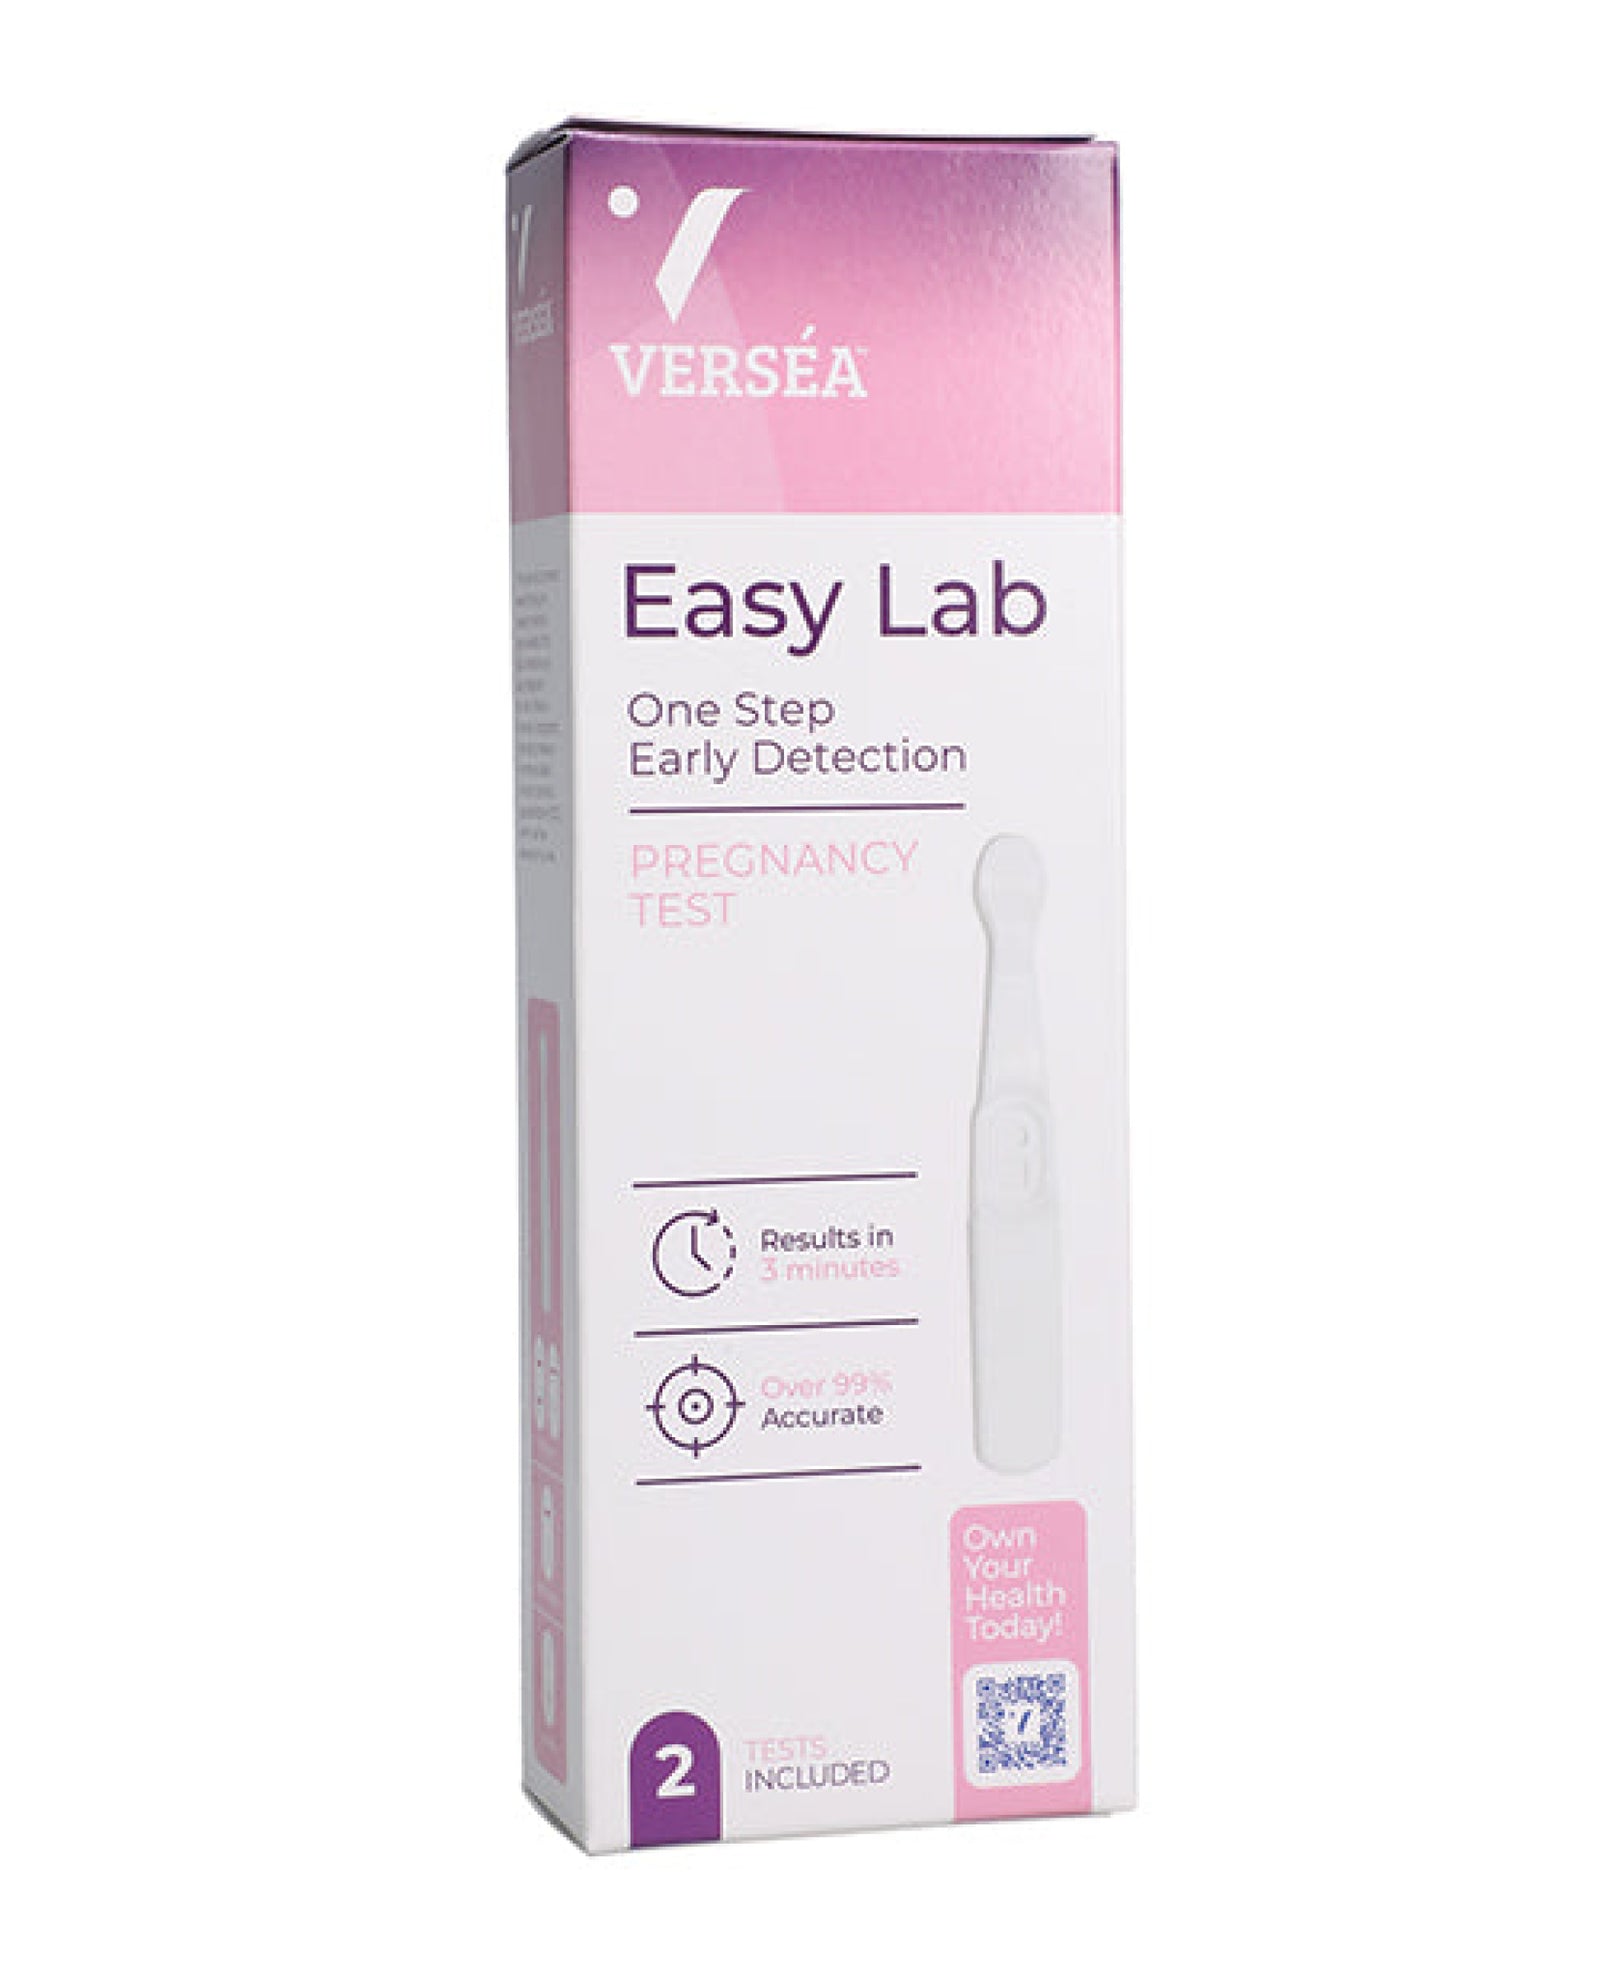 Versea EasyLab Pregnancy Test - Pack of 2 Doc Johnson Consignment